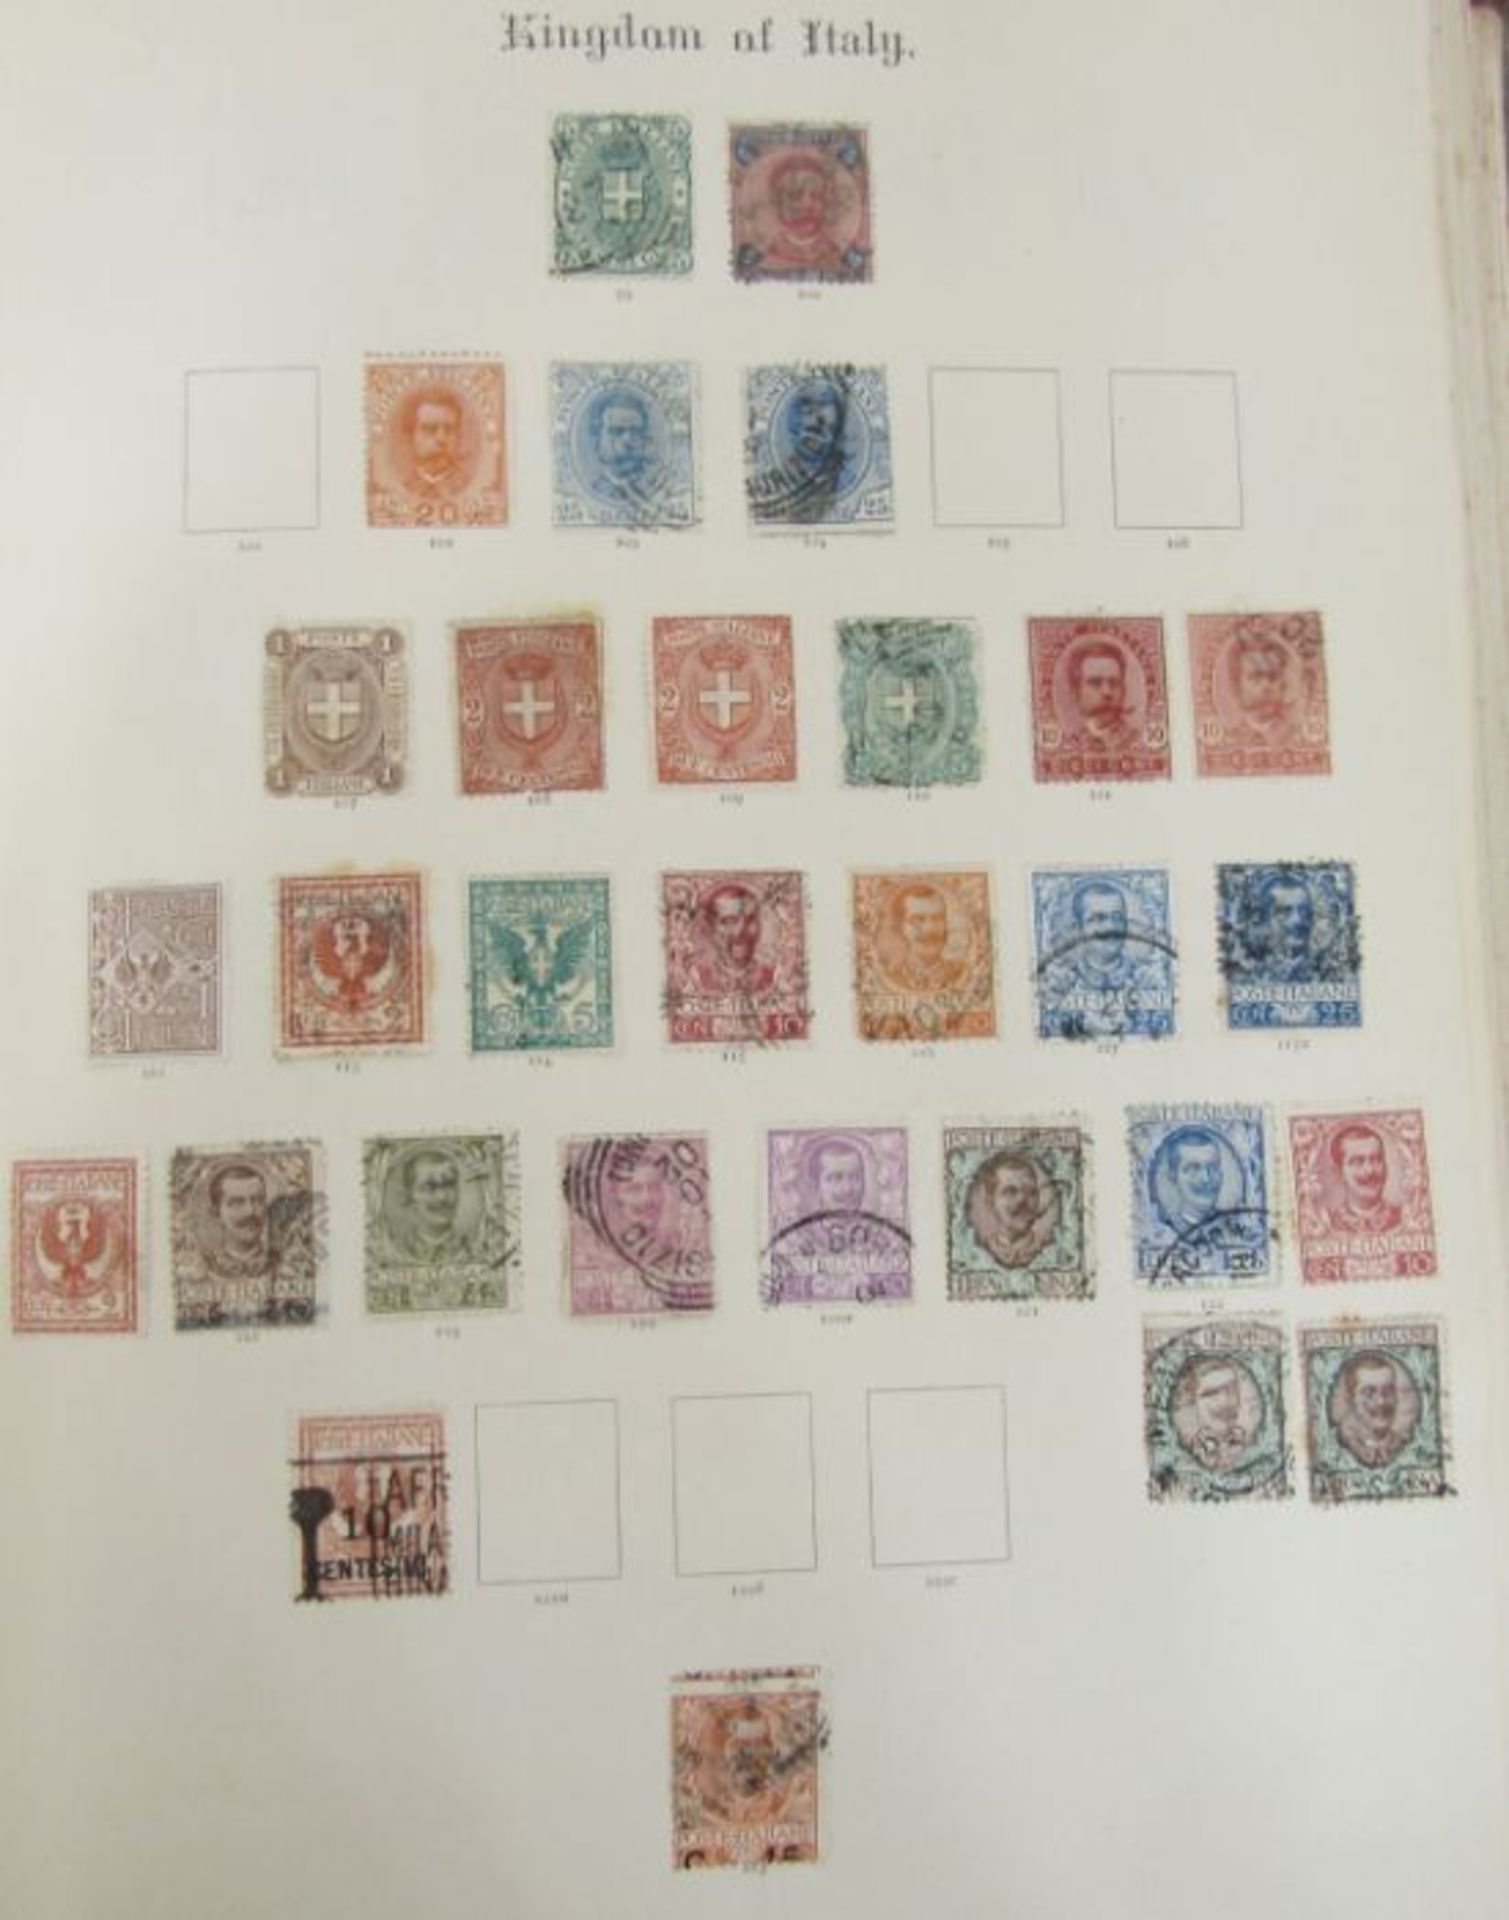 Europe: Sectional Imperial album of countries H-T, starting Holland ending Turkey including some - Image 4 of 10